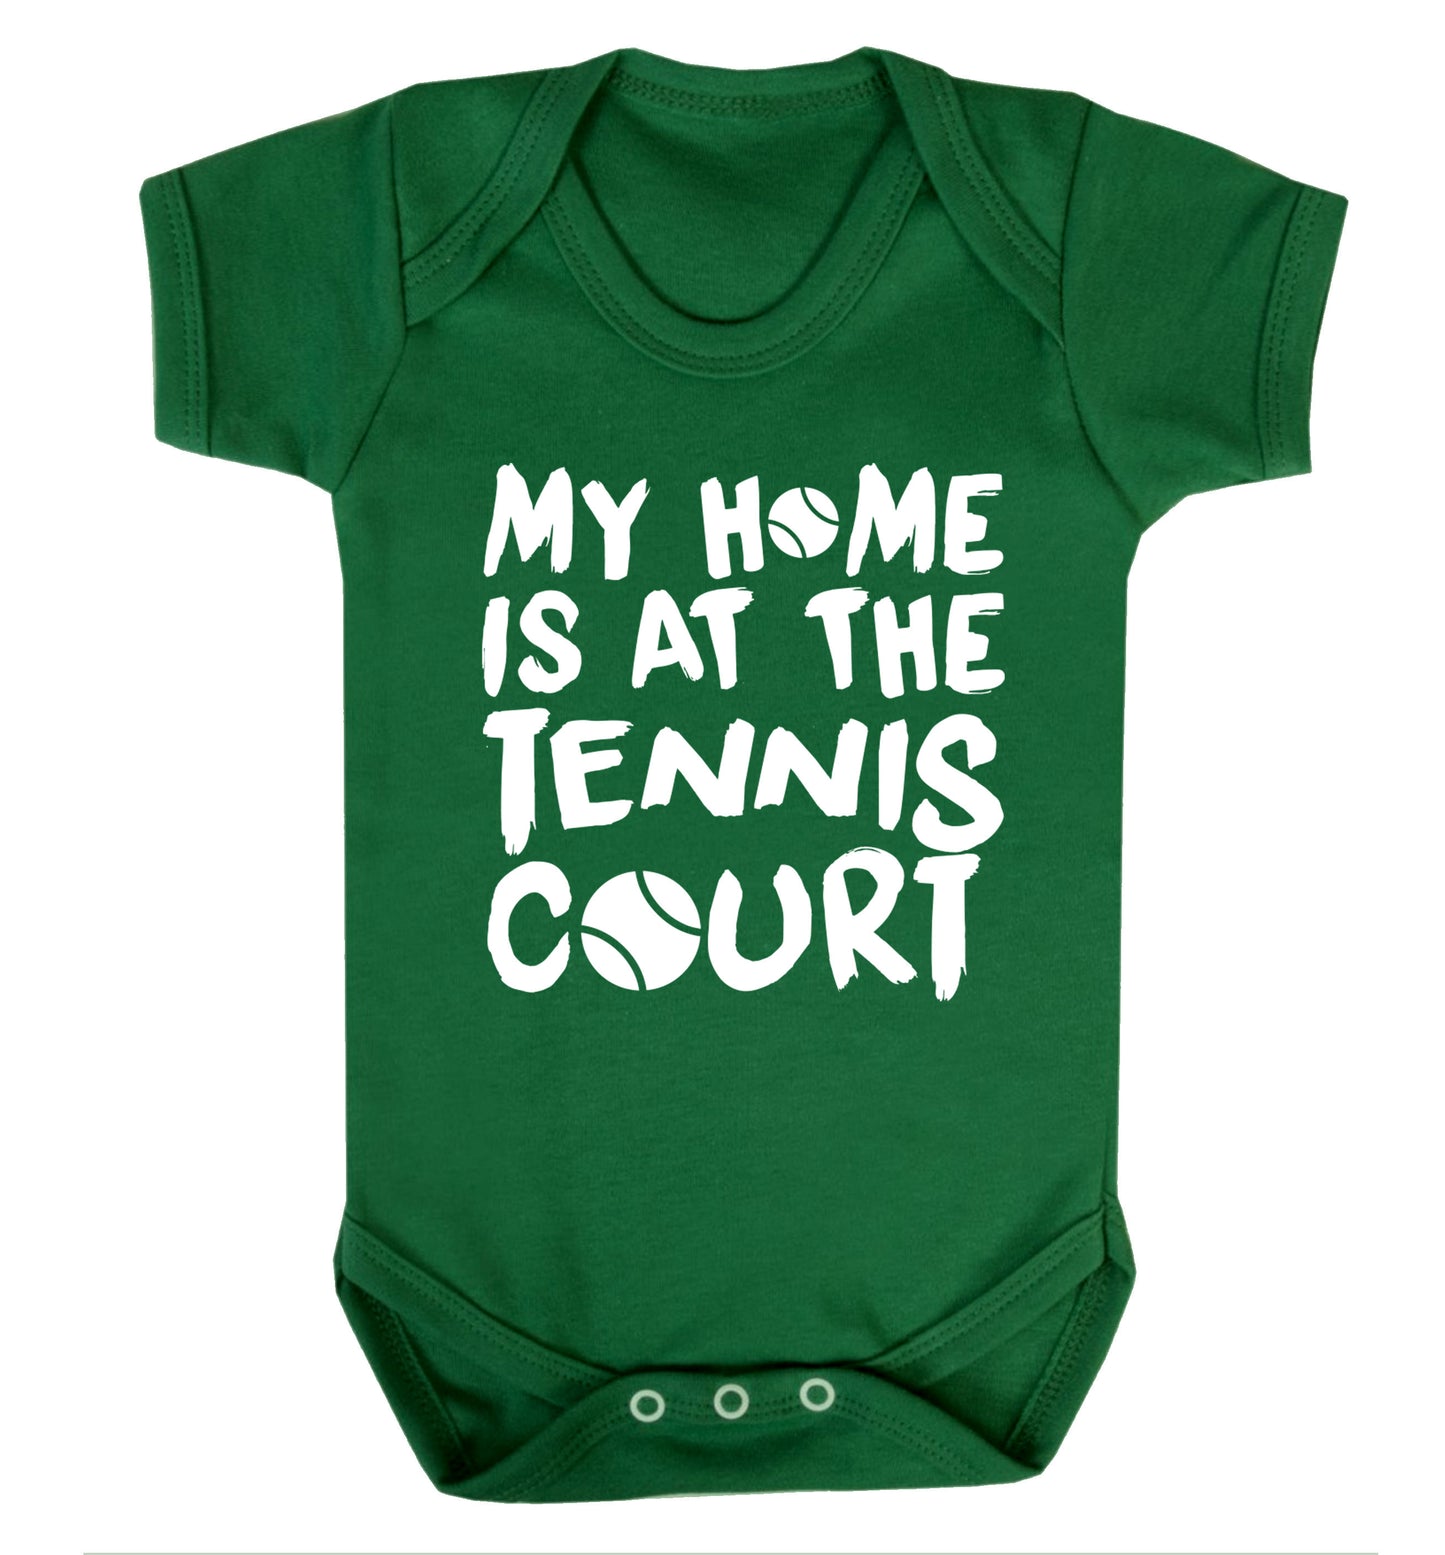 My home is at the tennis court Baby Vest green 18-24 months